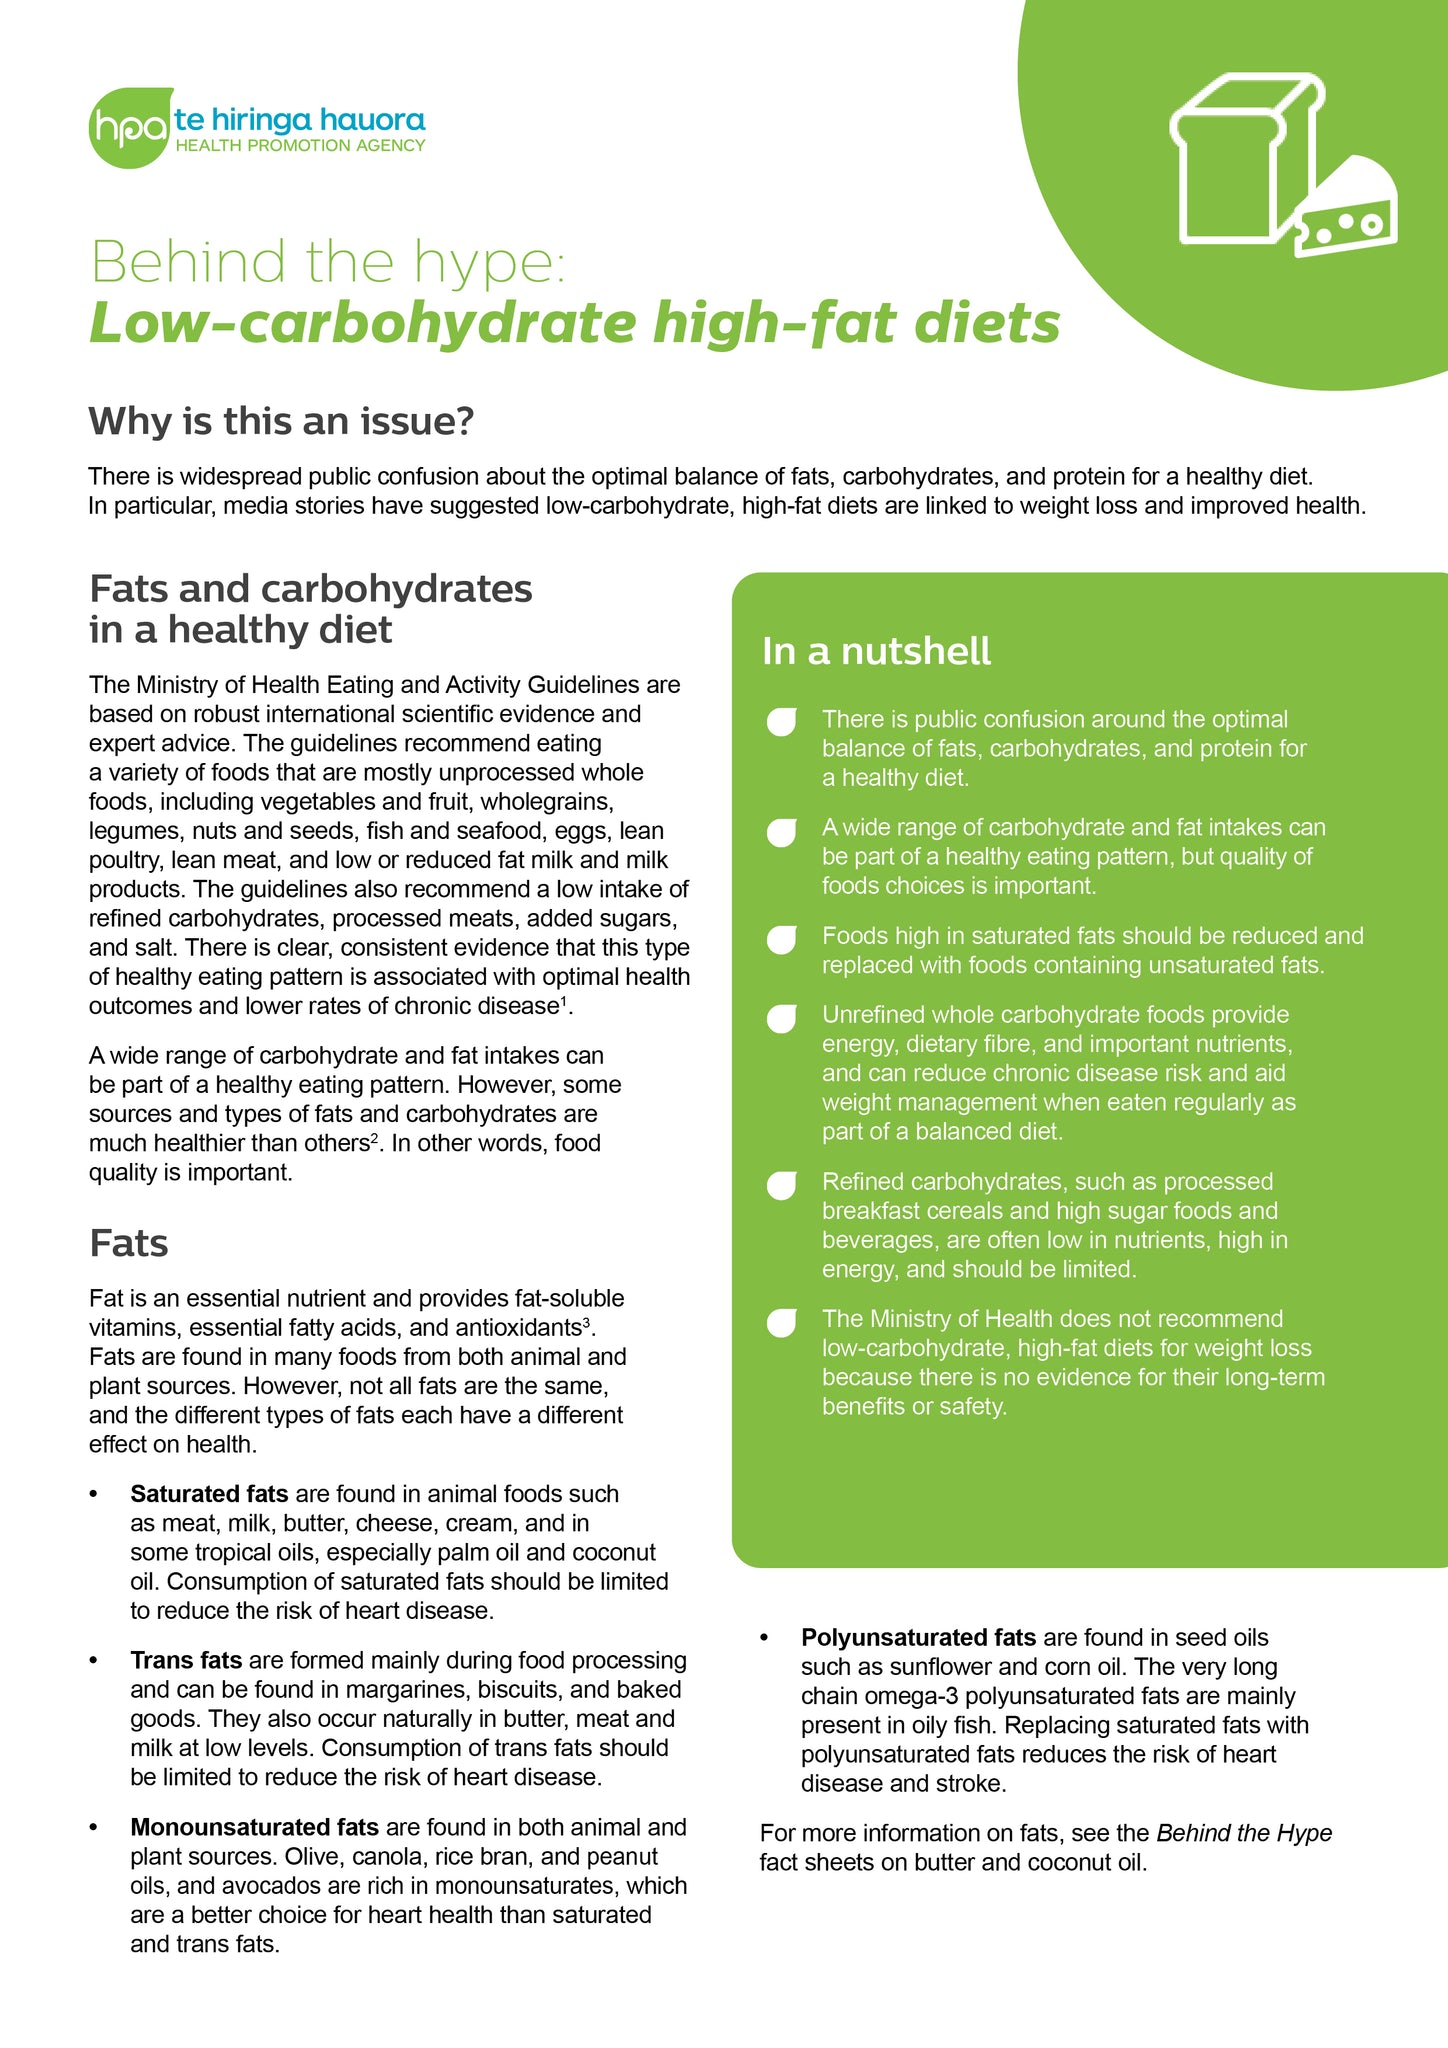 Behind the hype: Low-carbohydrate high-fat diets - Digital only